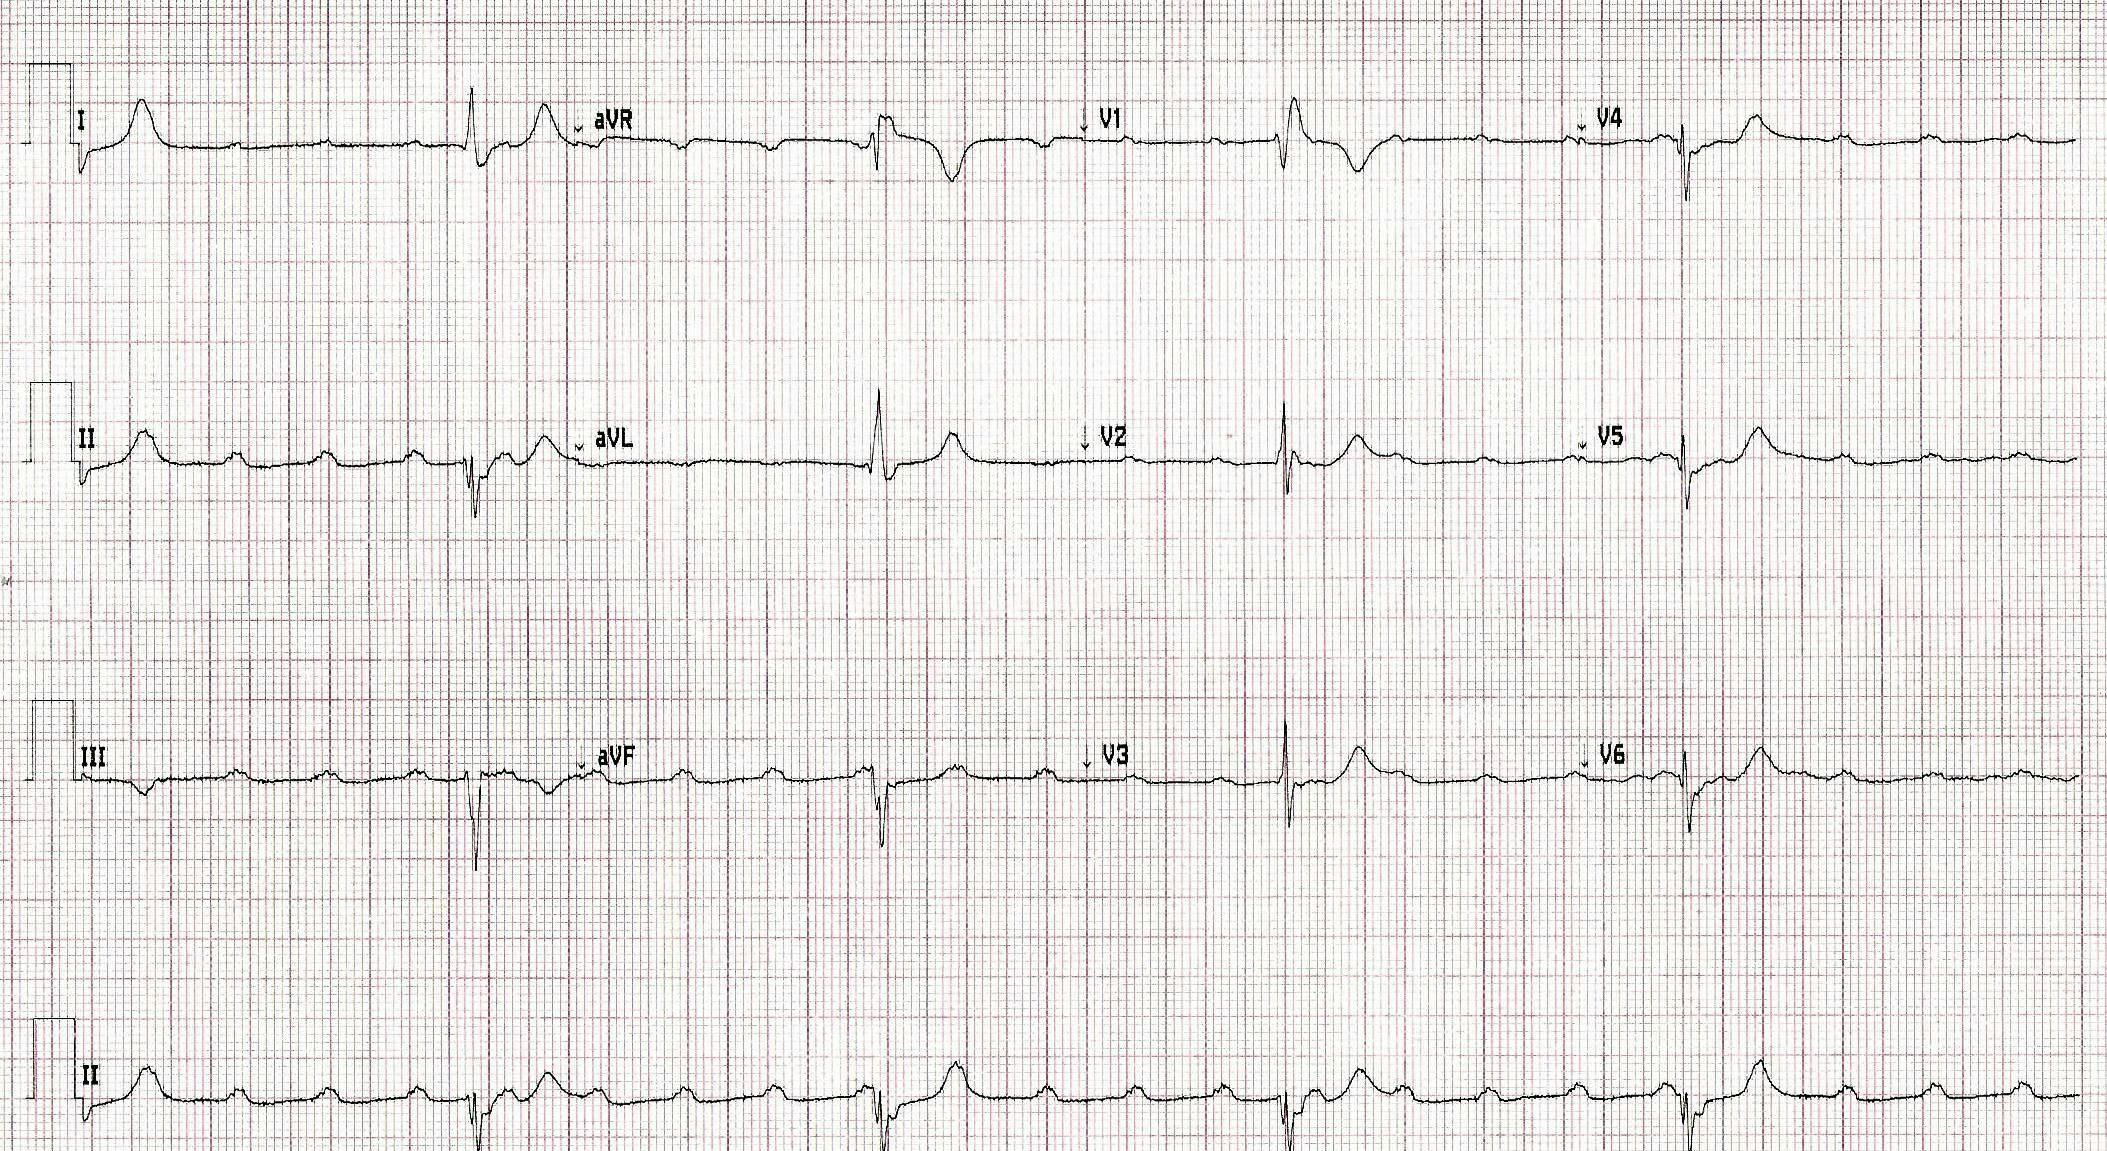 Print out of an ECG slip